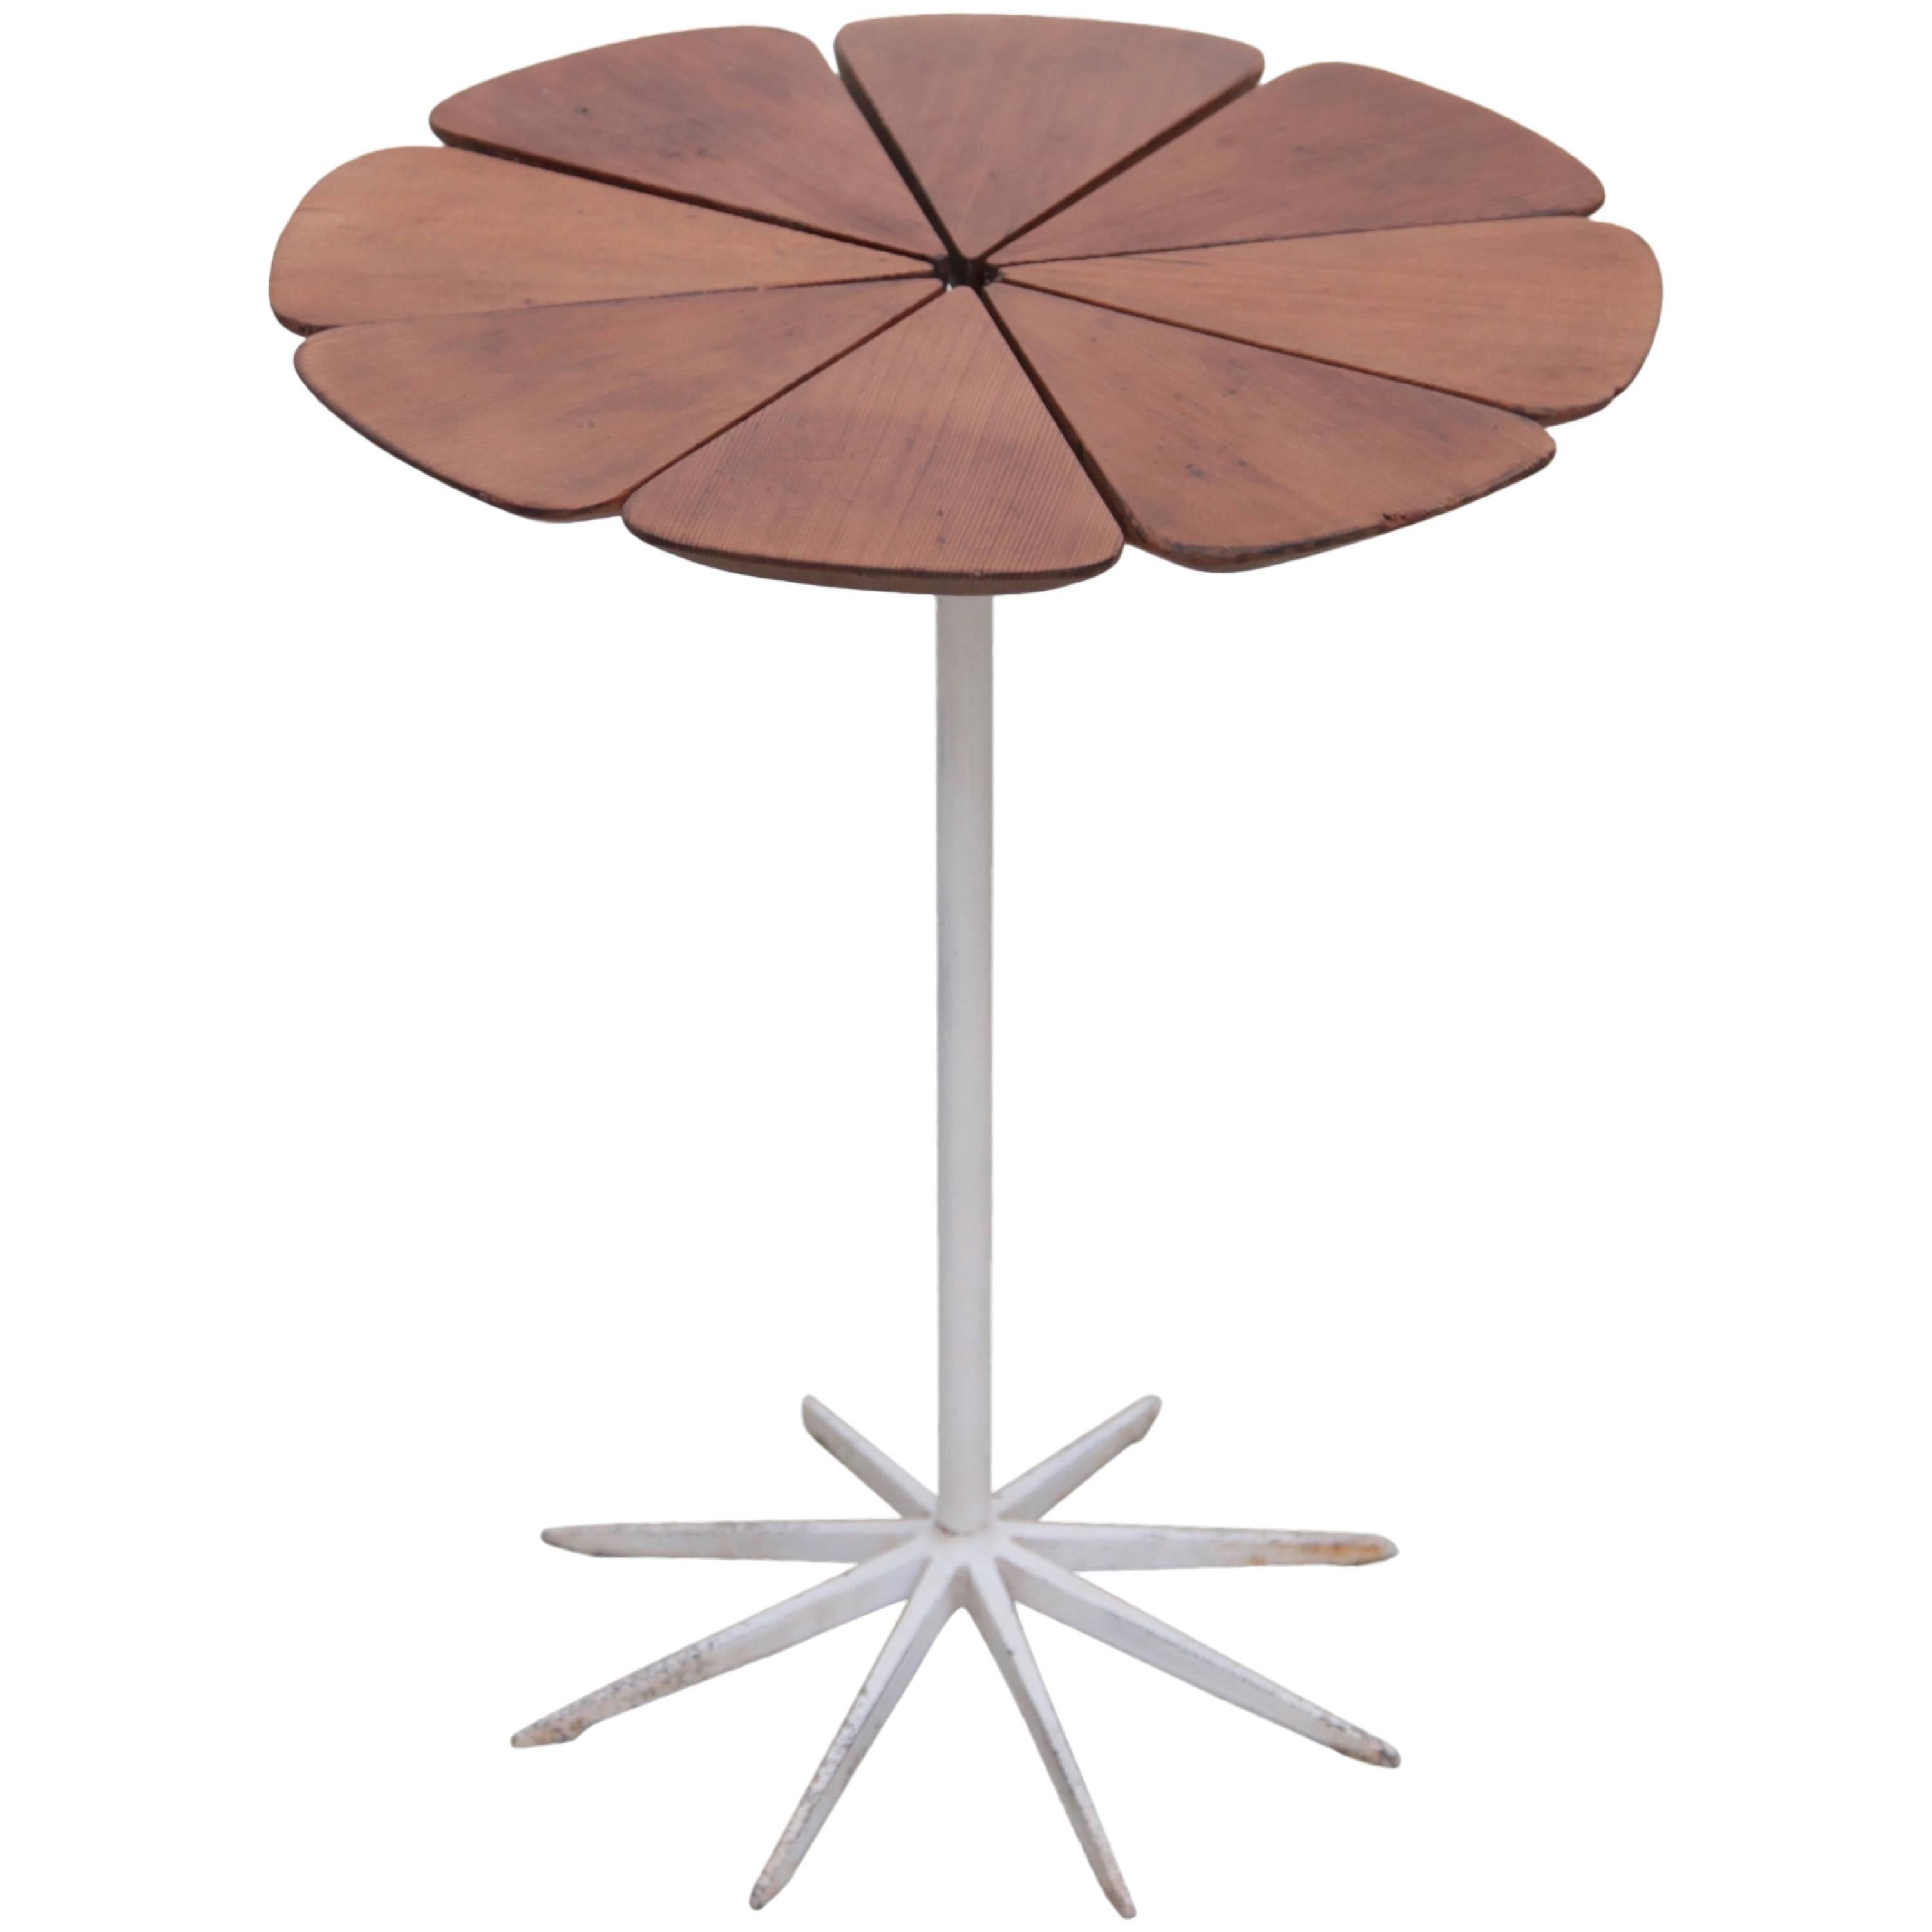 Amazing Richard Schultz Petal Table for Knoll in Original Condition